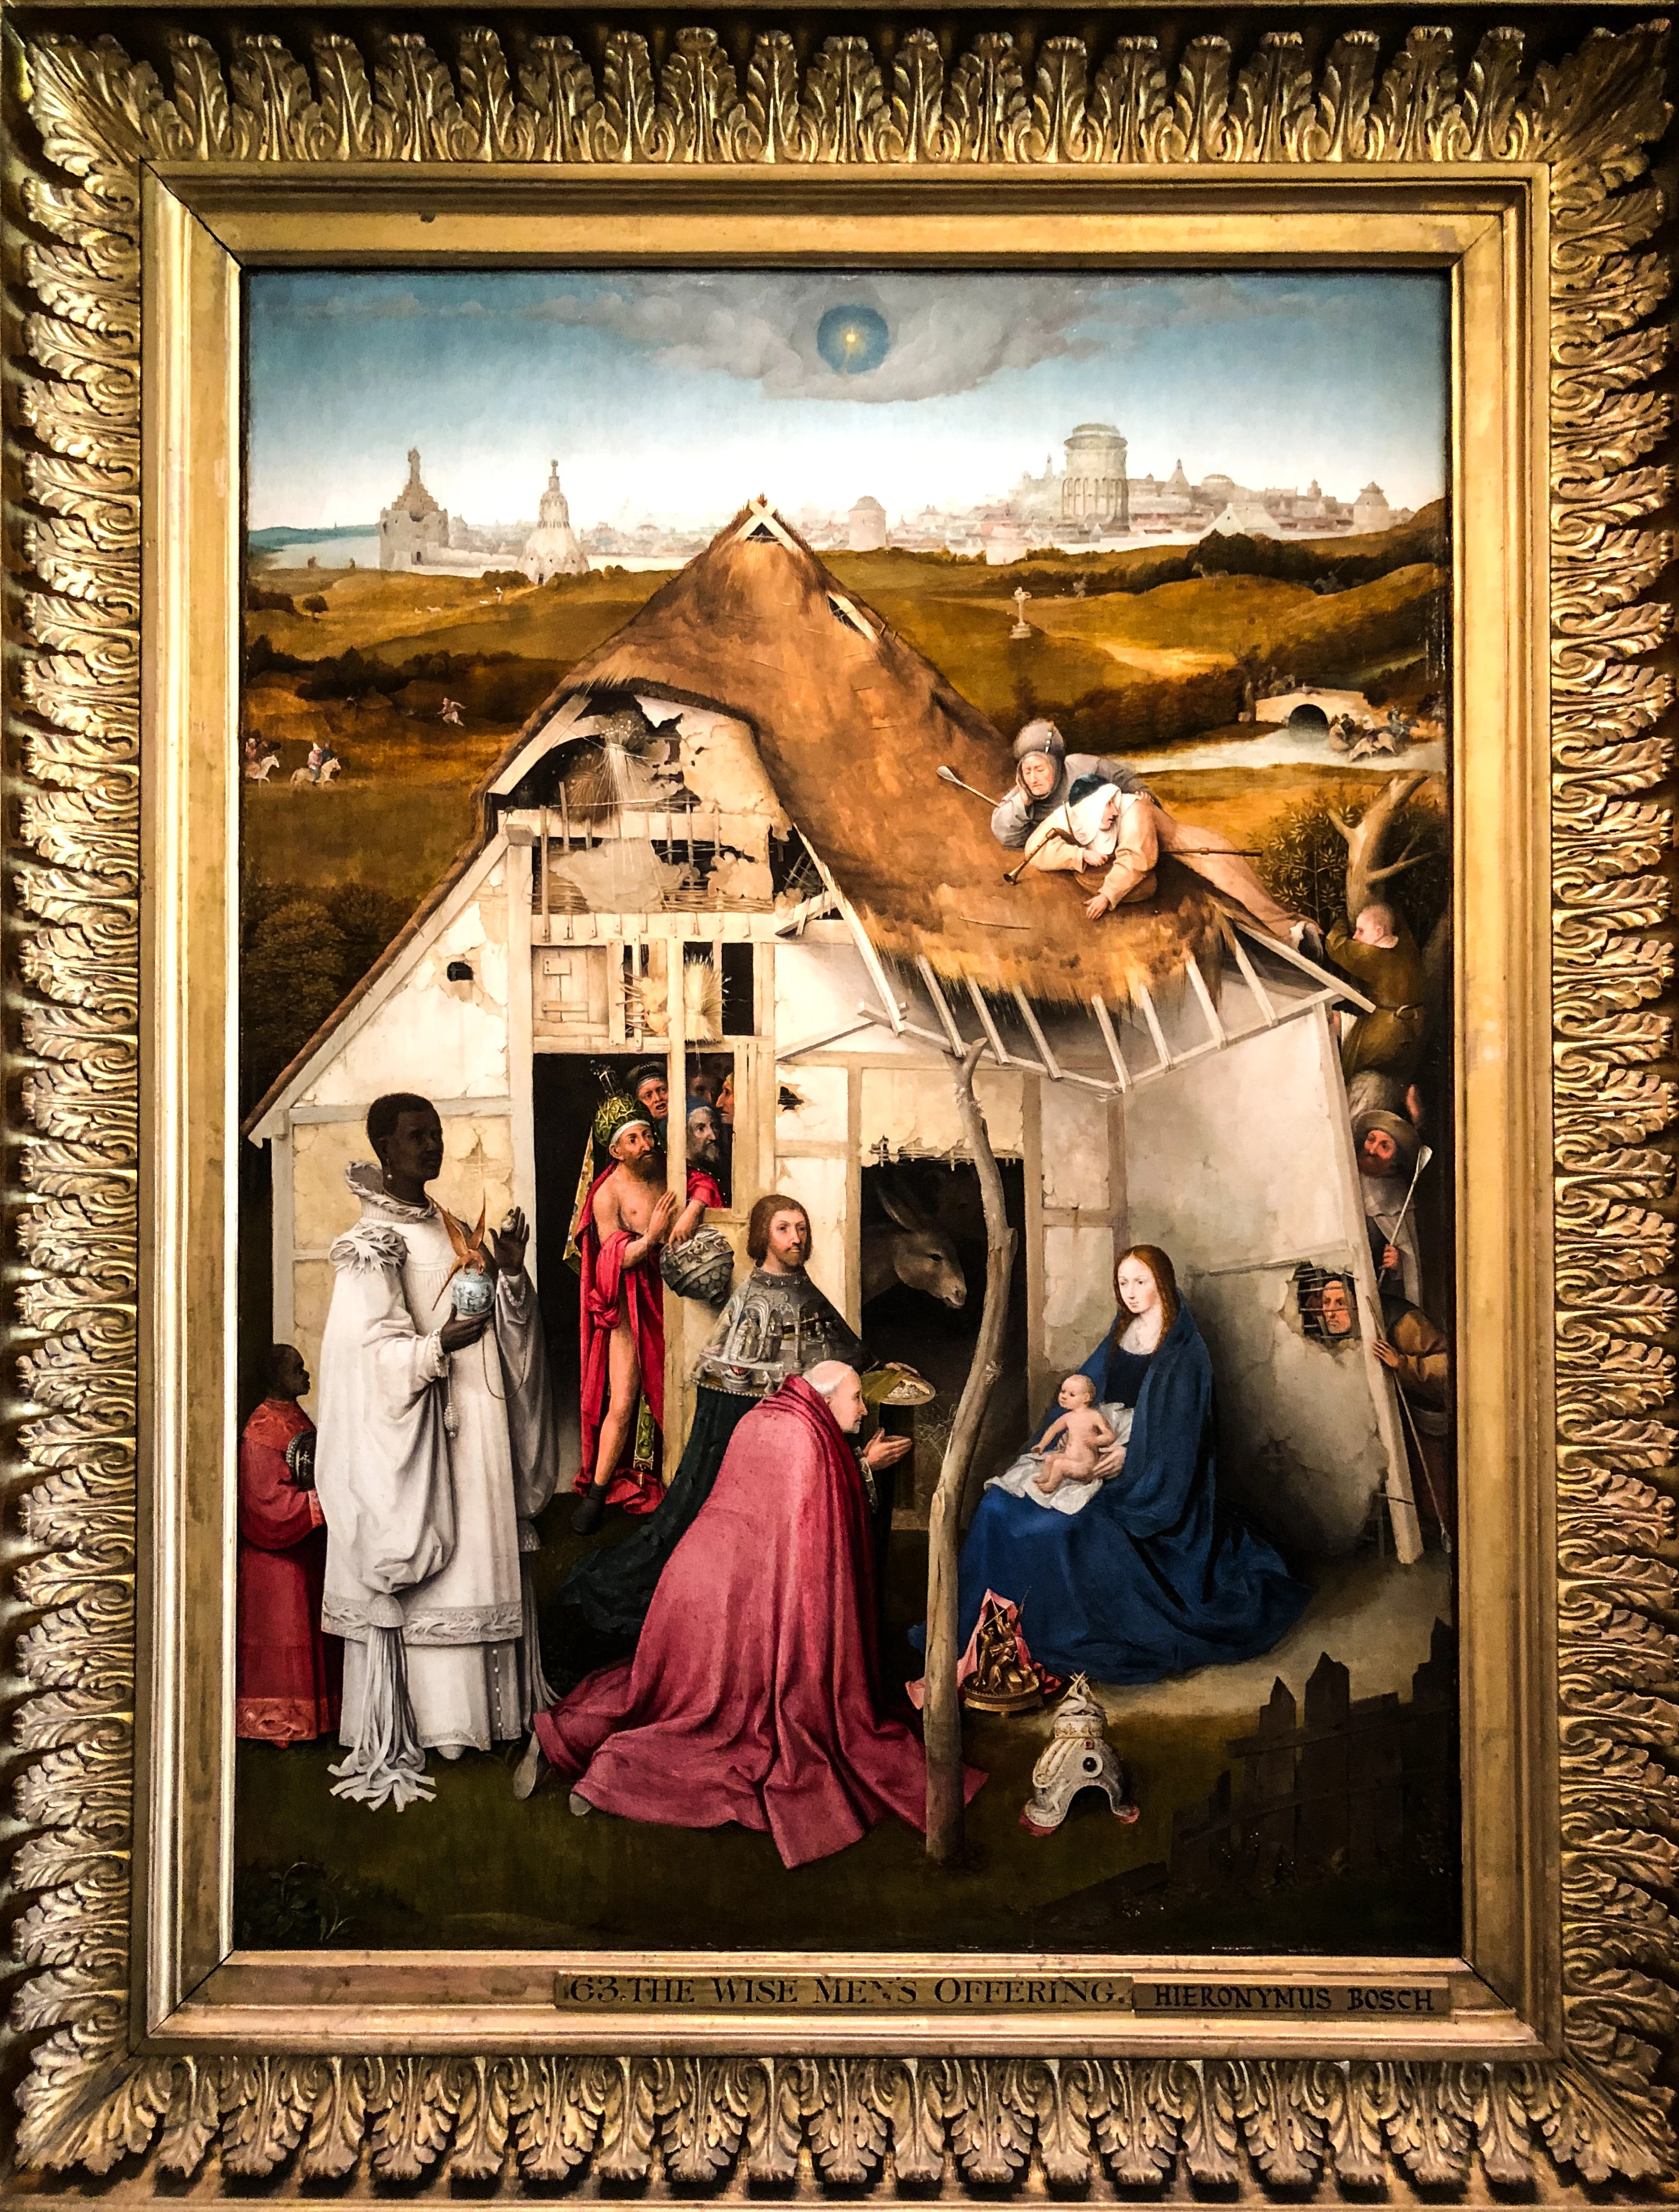 The Adoration of the Magi, Hieronymus Bosch